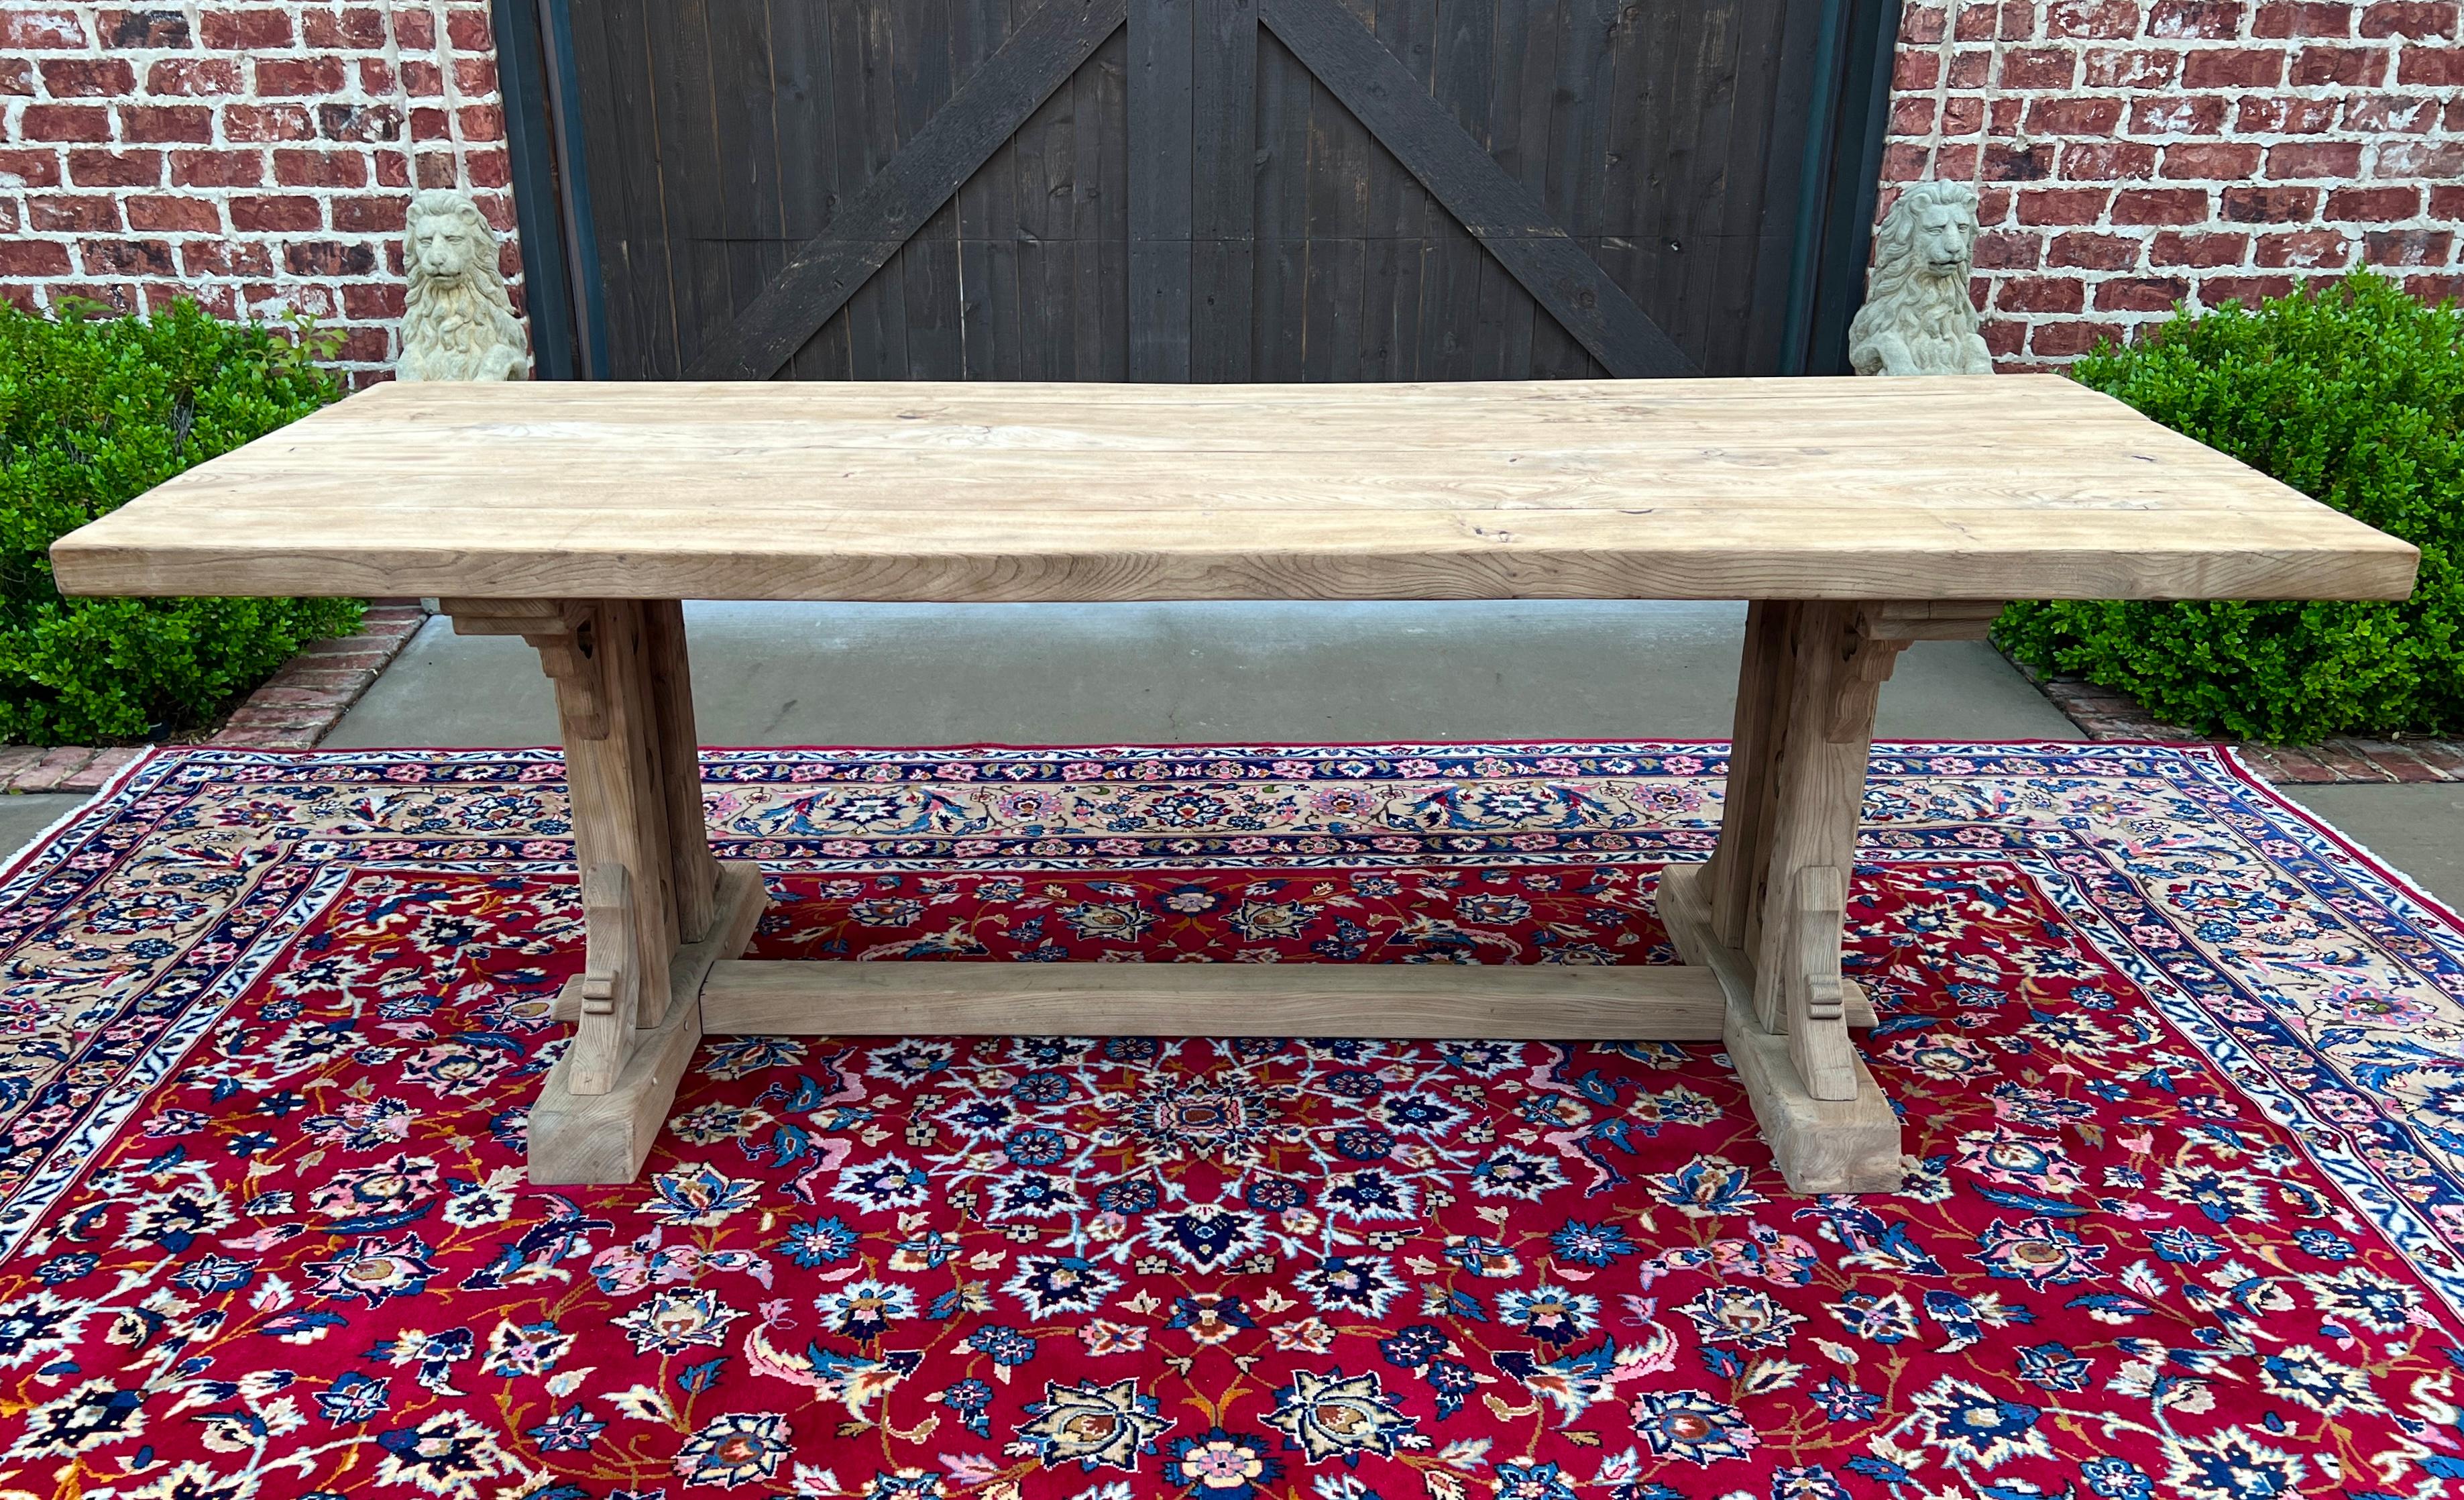 EXCELLENT LARGE Vintage French Gothic Bleached Oak or possibly Elm Table Dining Table Desk Office Conference Library Trestle Table~~Over 7 Feet Wide~~

This beautiful table has the 